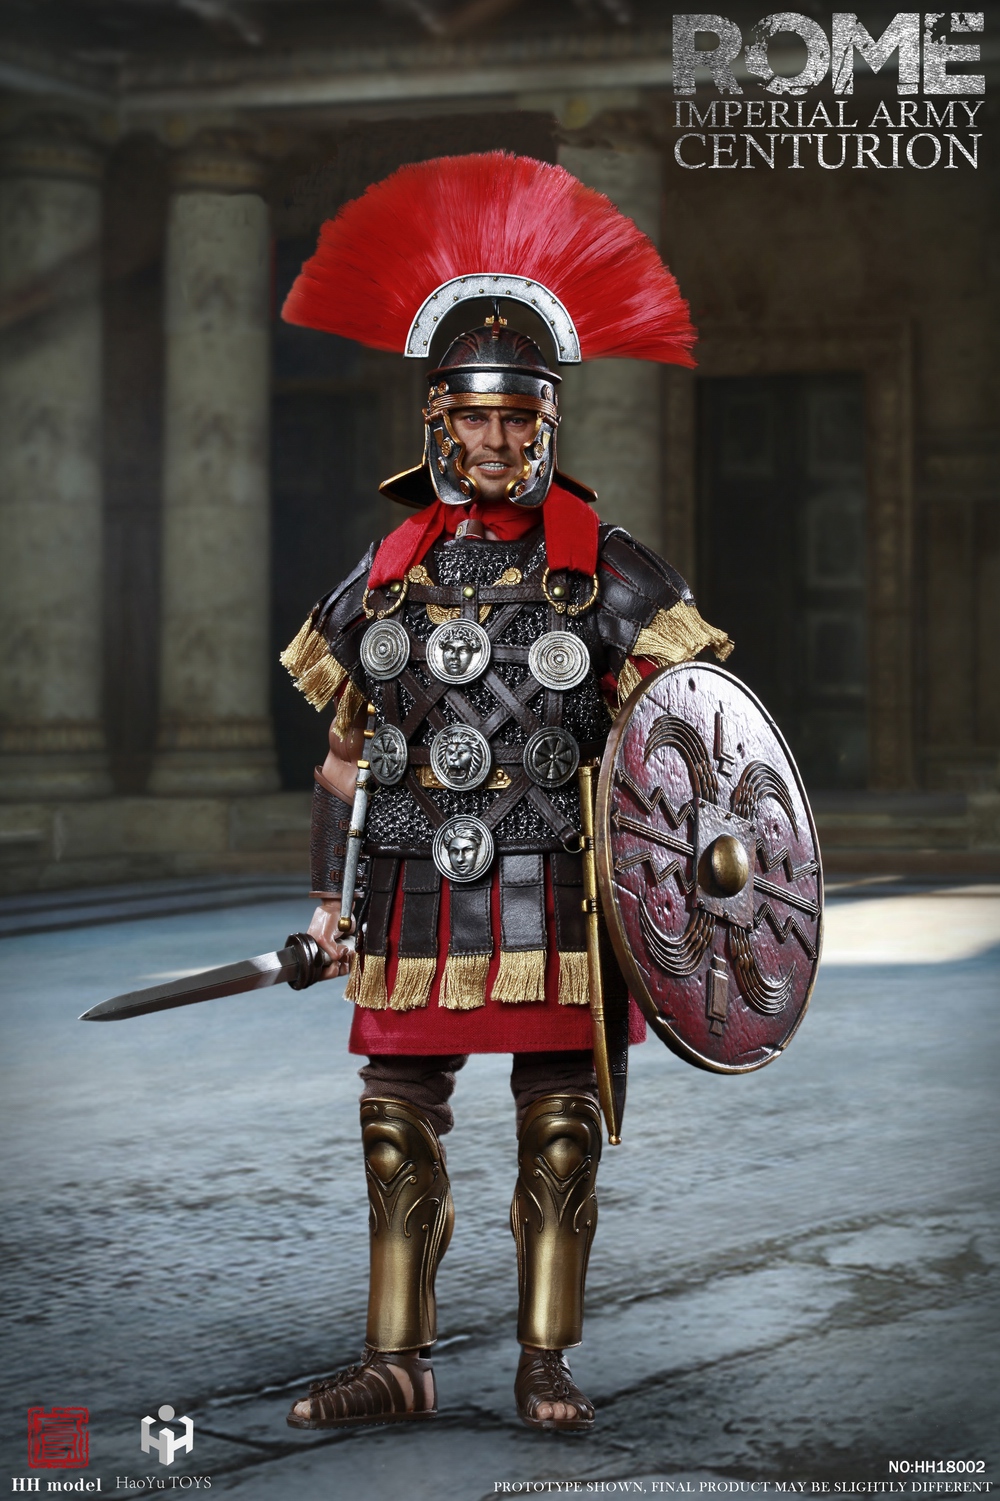 HaoYuToys - NEW PRODUCT: HH Model X HaoYuTOYS :1/6 Imperial Army — Centurion Action Figure 12331110